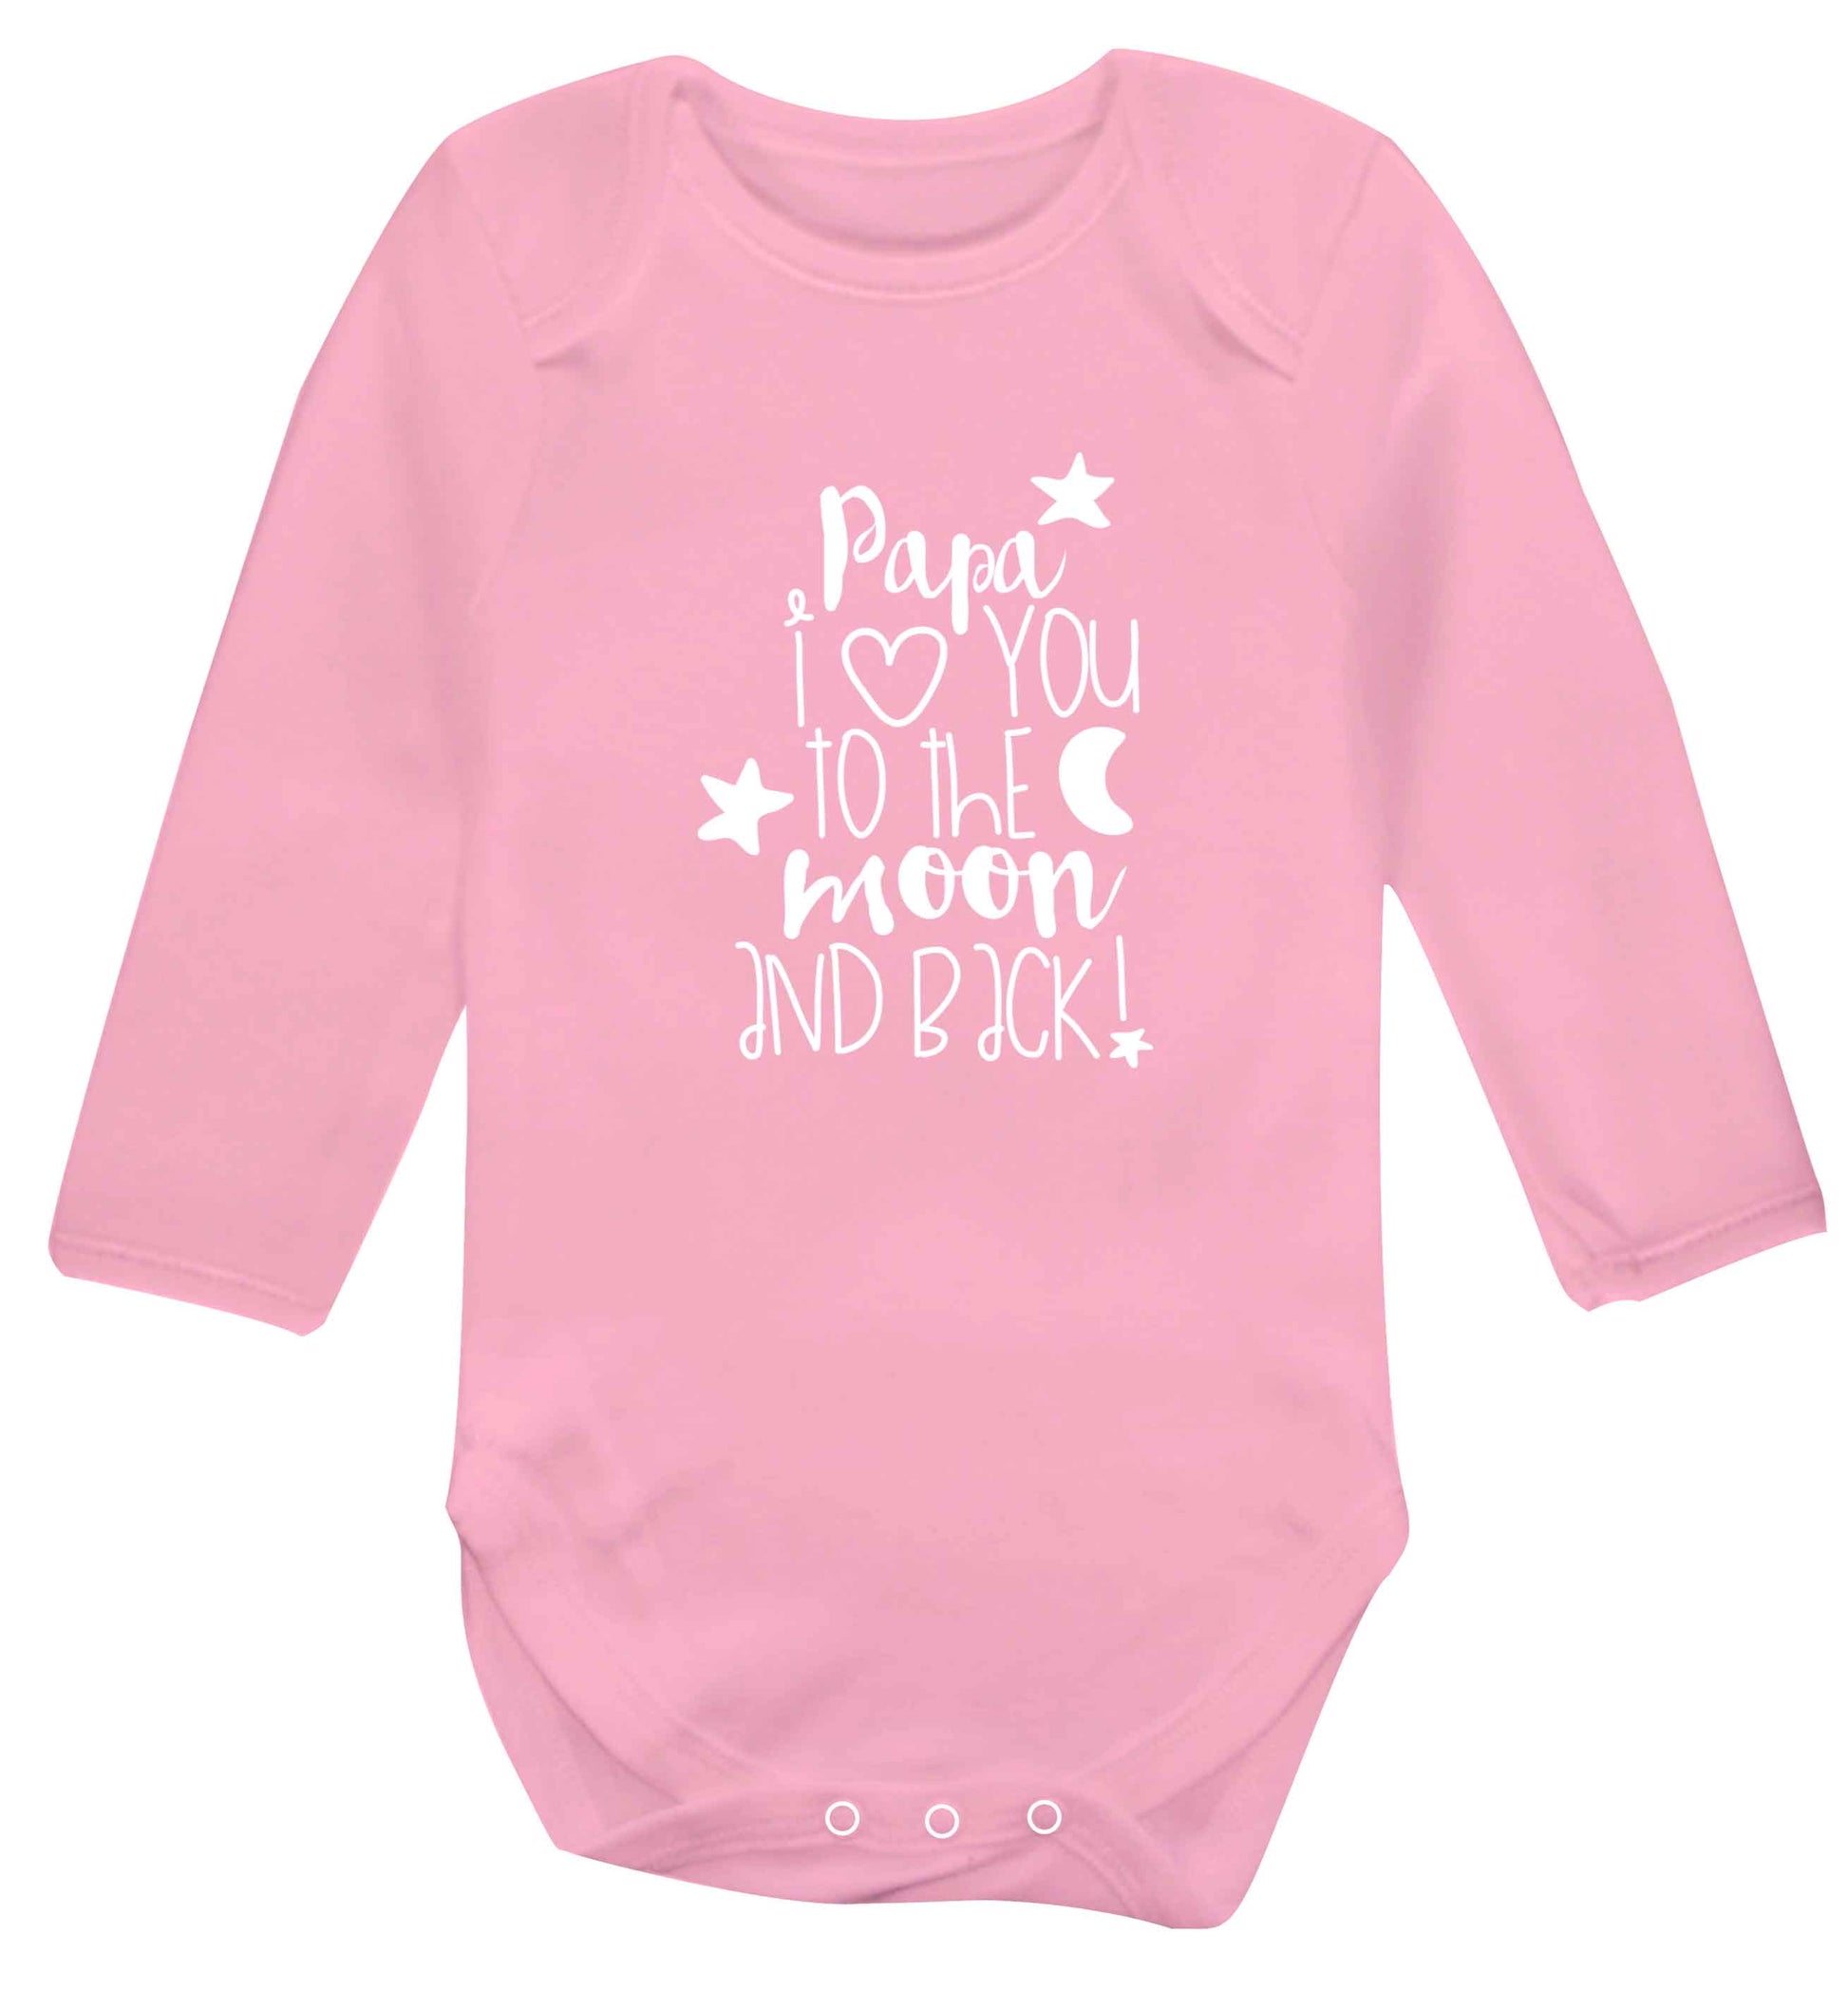 Papa I love you to the moon and back baby vest long sleeved pale pink 6-12 months